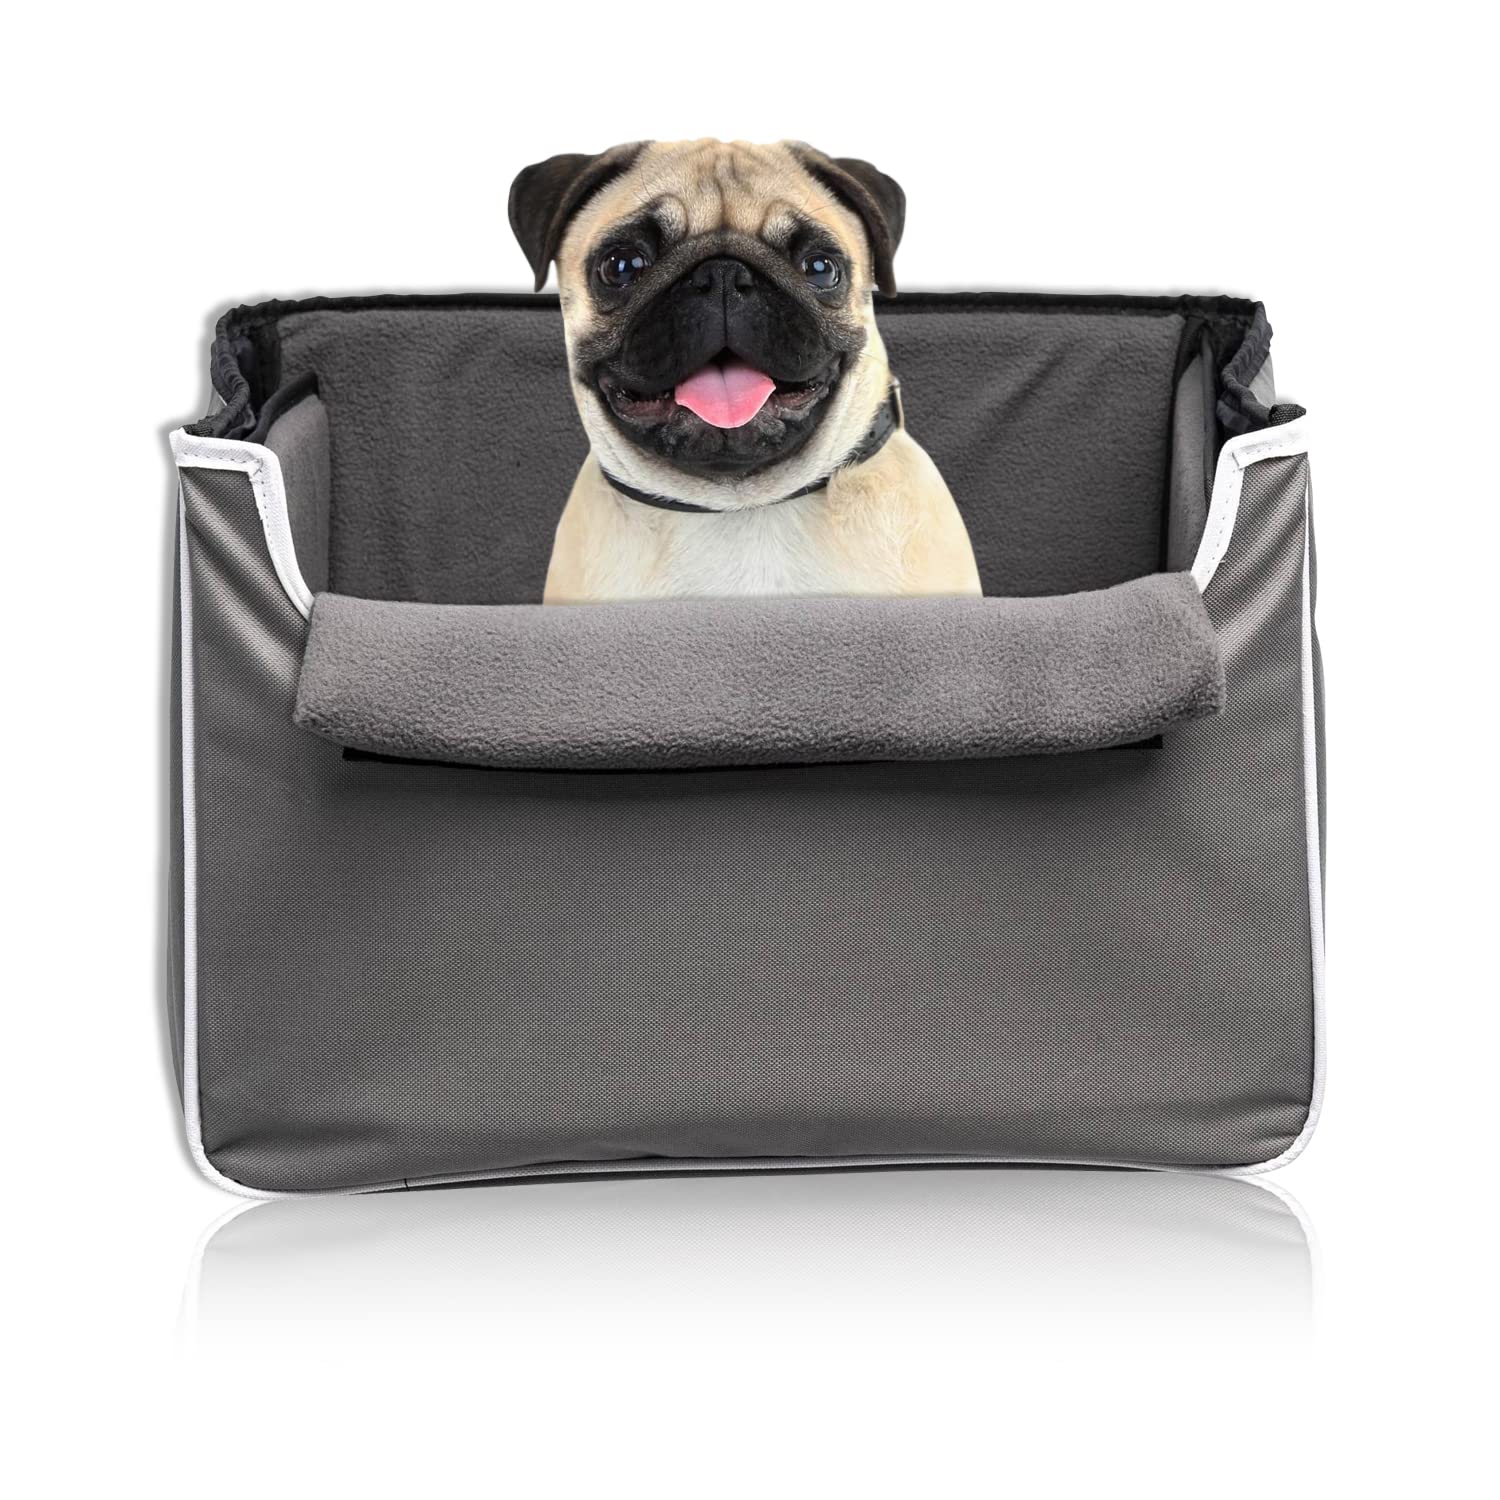 CO-PILOT Dog Car Seat, Foldable Dog Booster Seat for Small Dogs, Dog Car Harness  - Like New